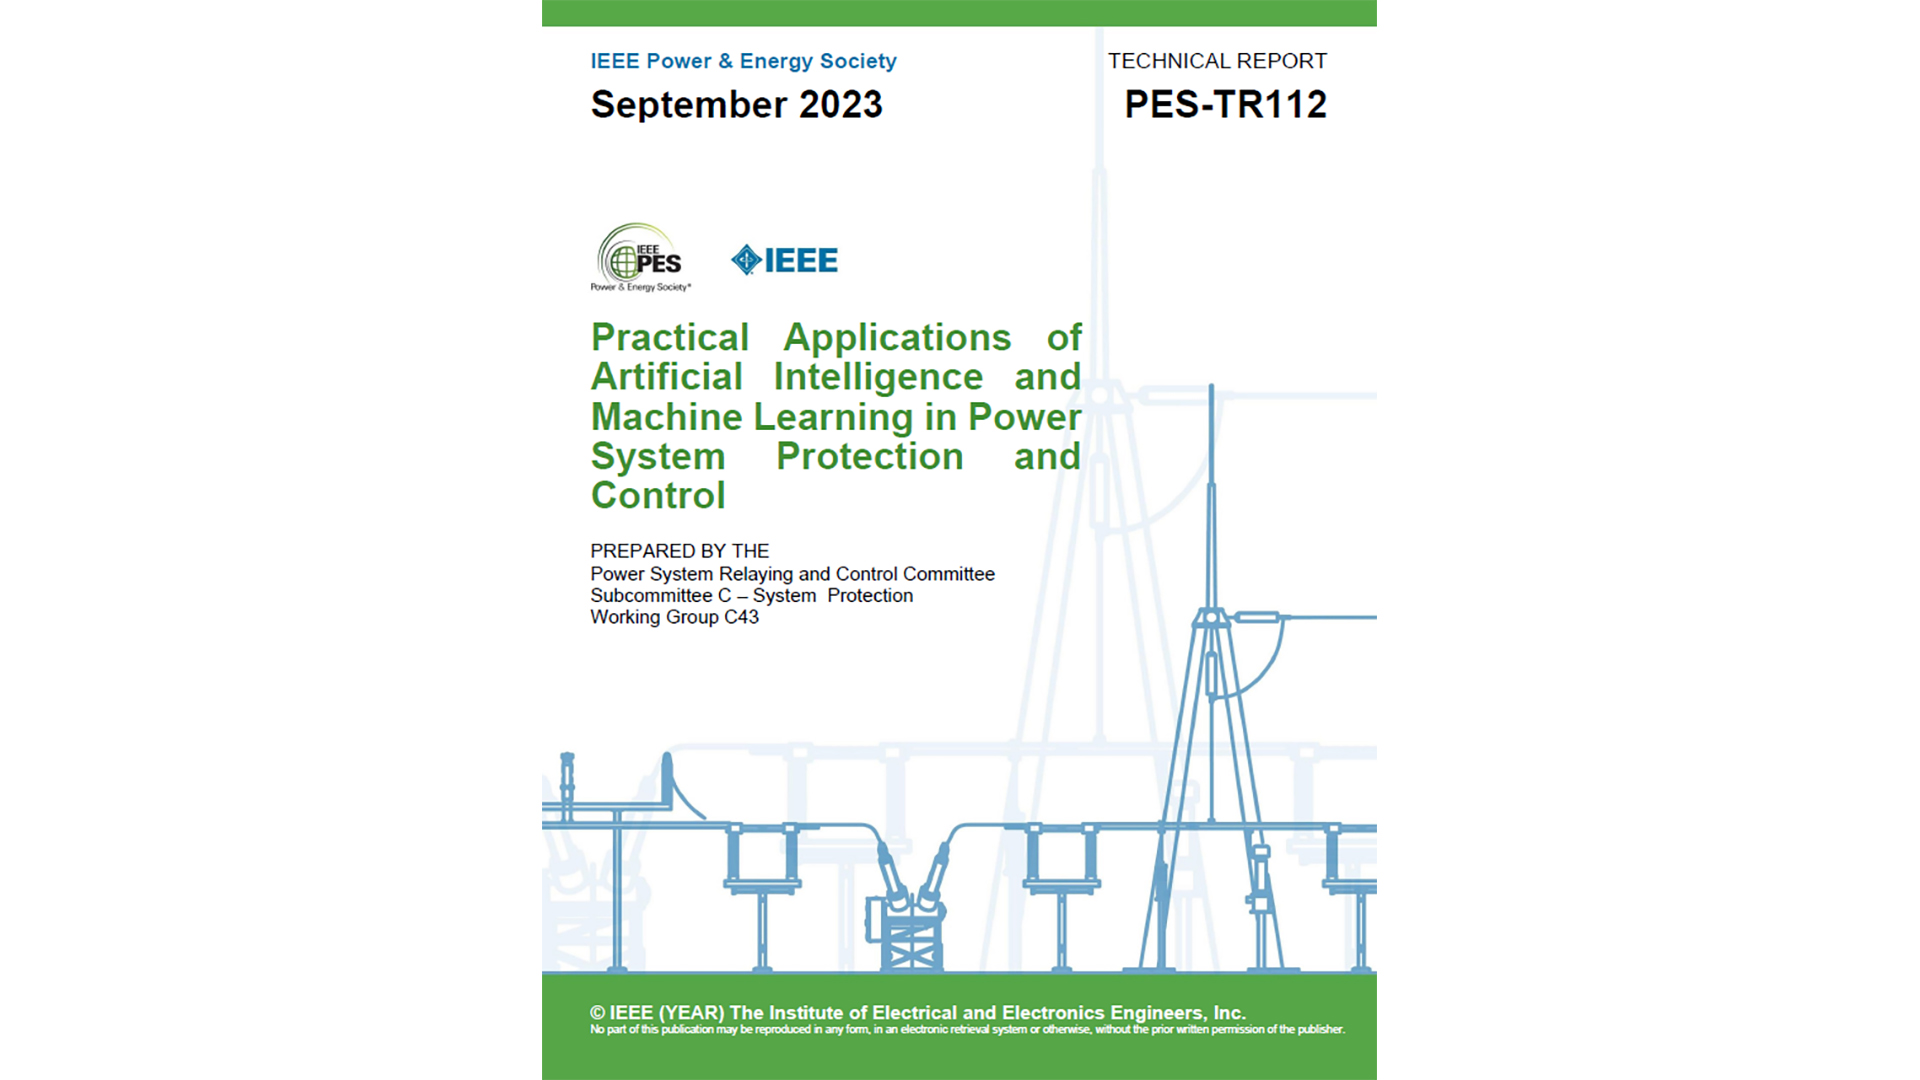 Practical Applications of Artificial Intelligence and Machine Learning in Power System Protection and Control